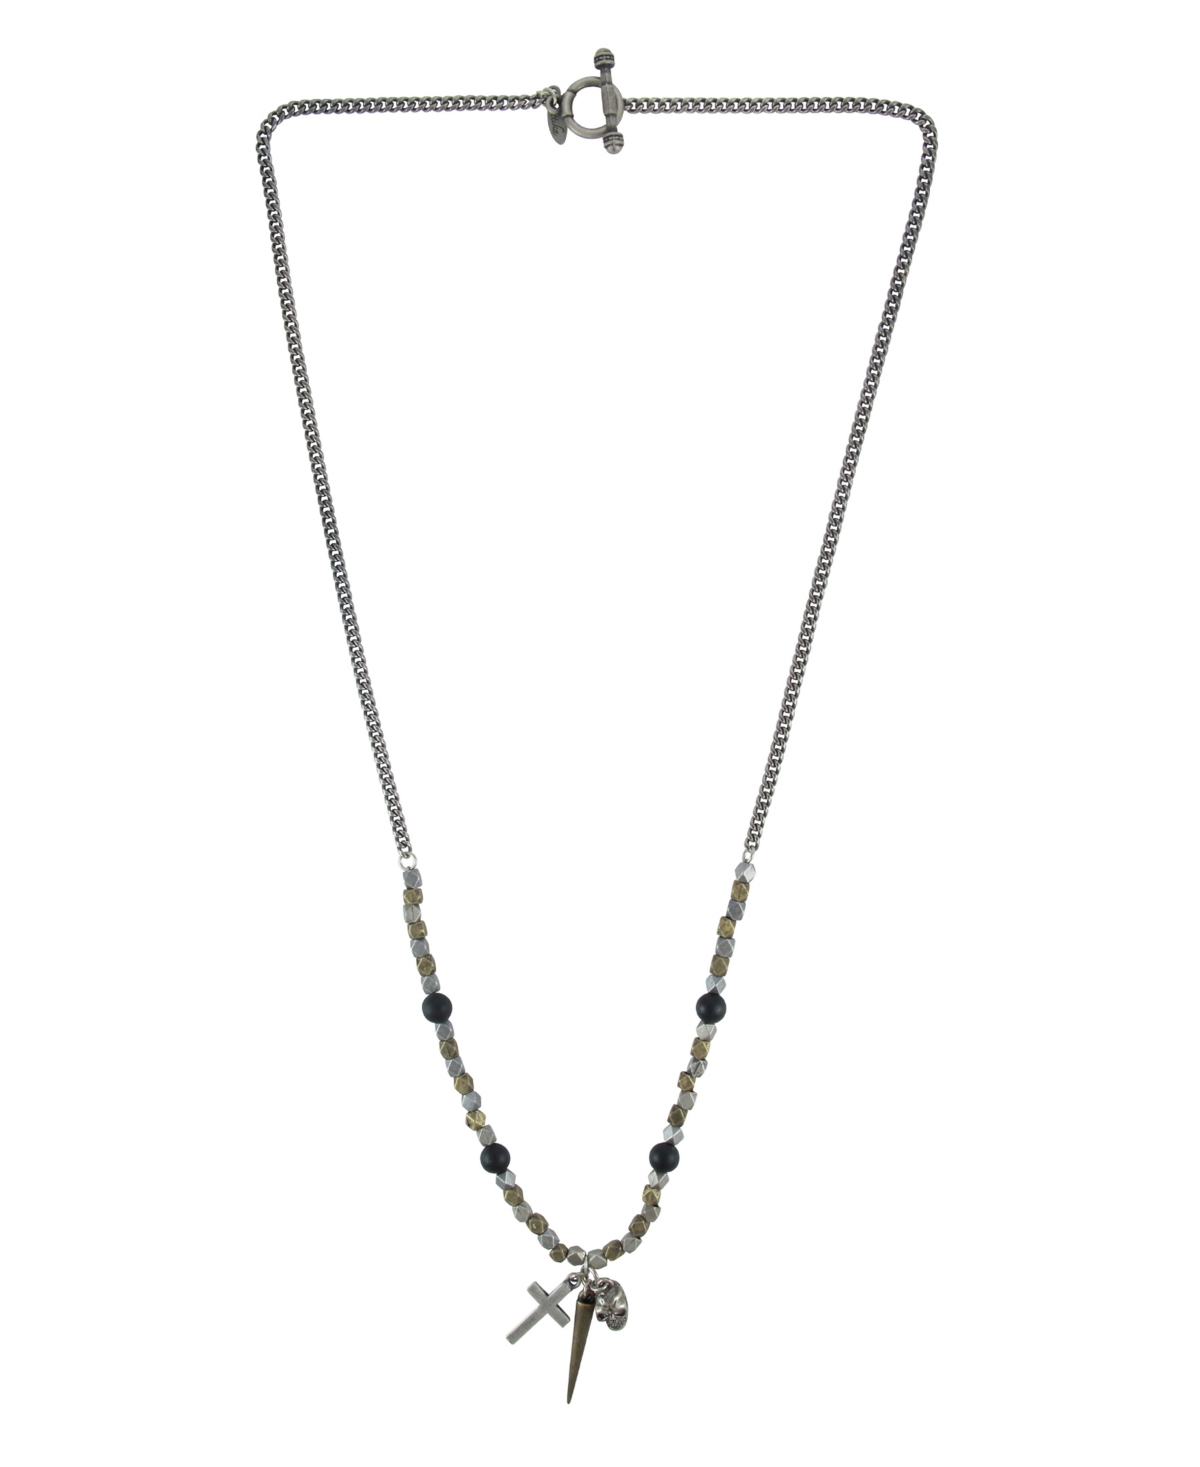 Mixed Metal Faceted Bead Necklace with Spike, Cross and Skull Charms - Multi